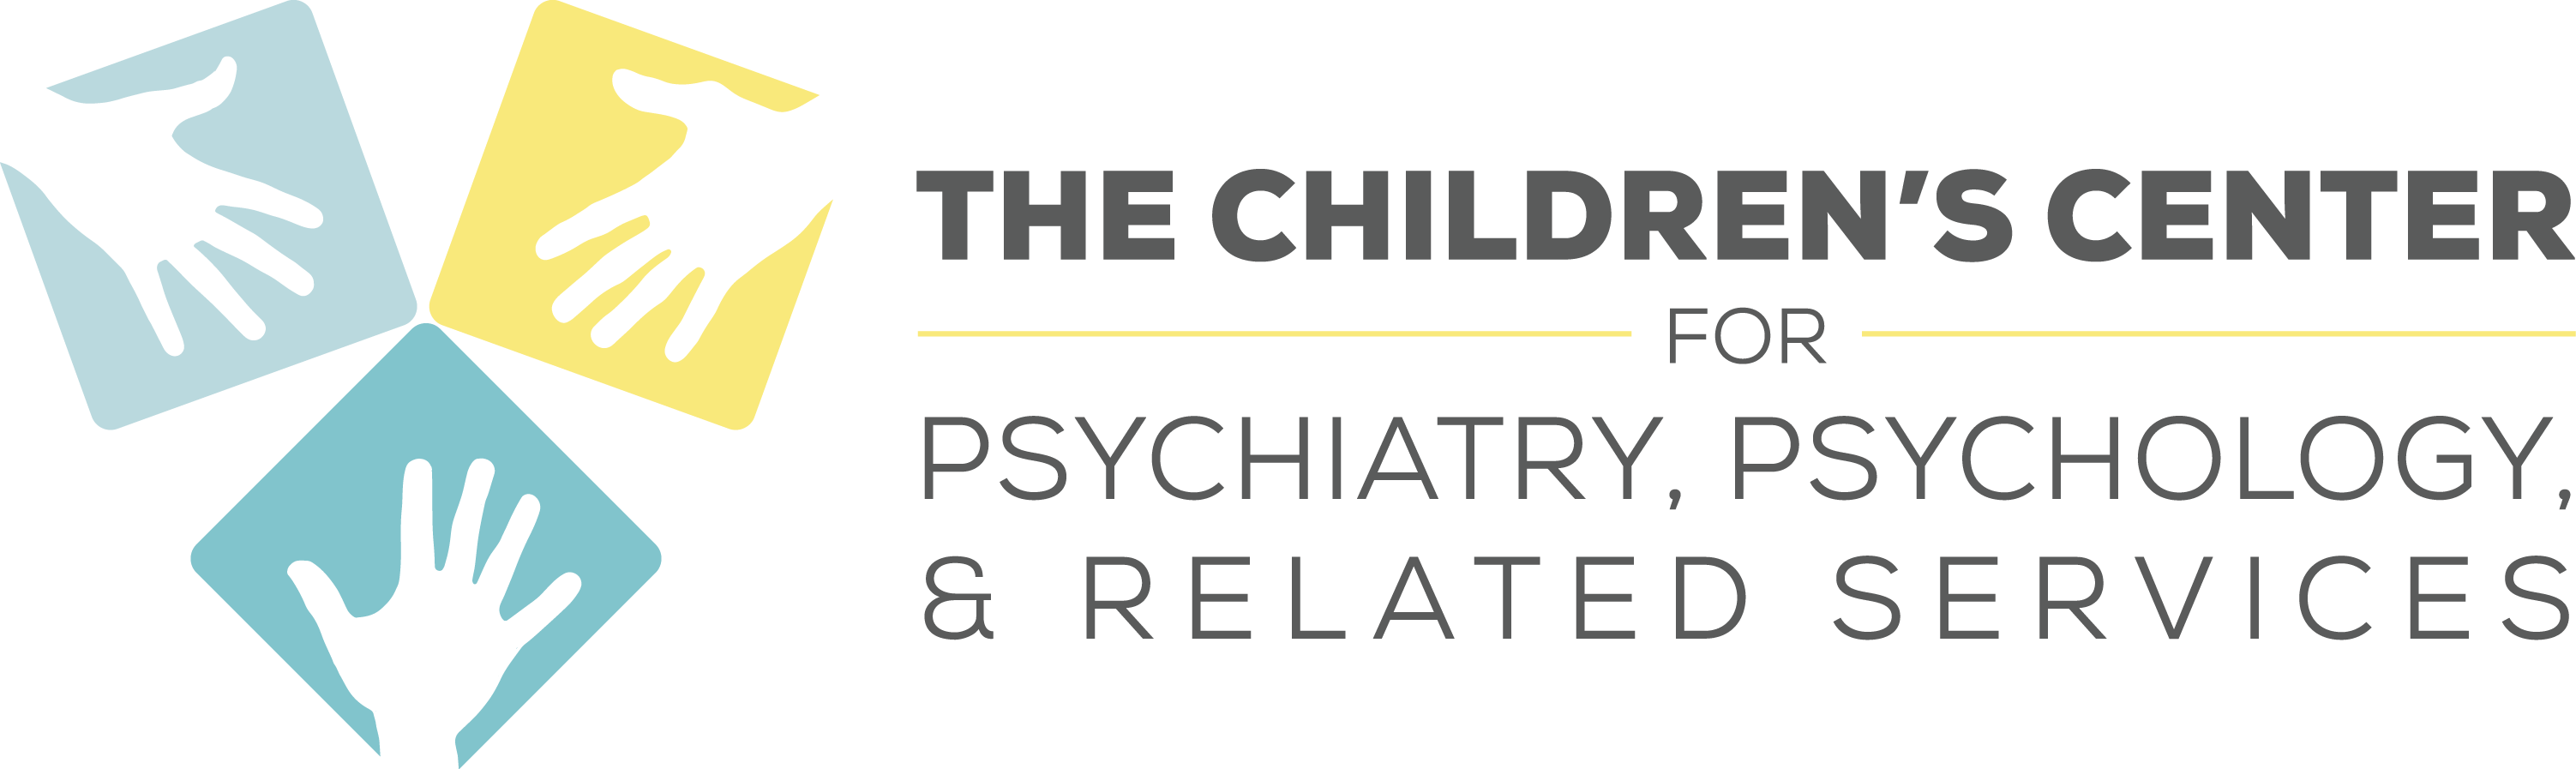 The Children’s Center for Psychiatry, Psychology, & Related Services